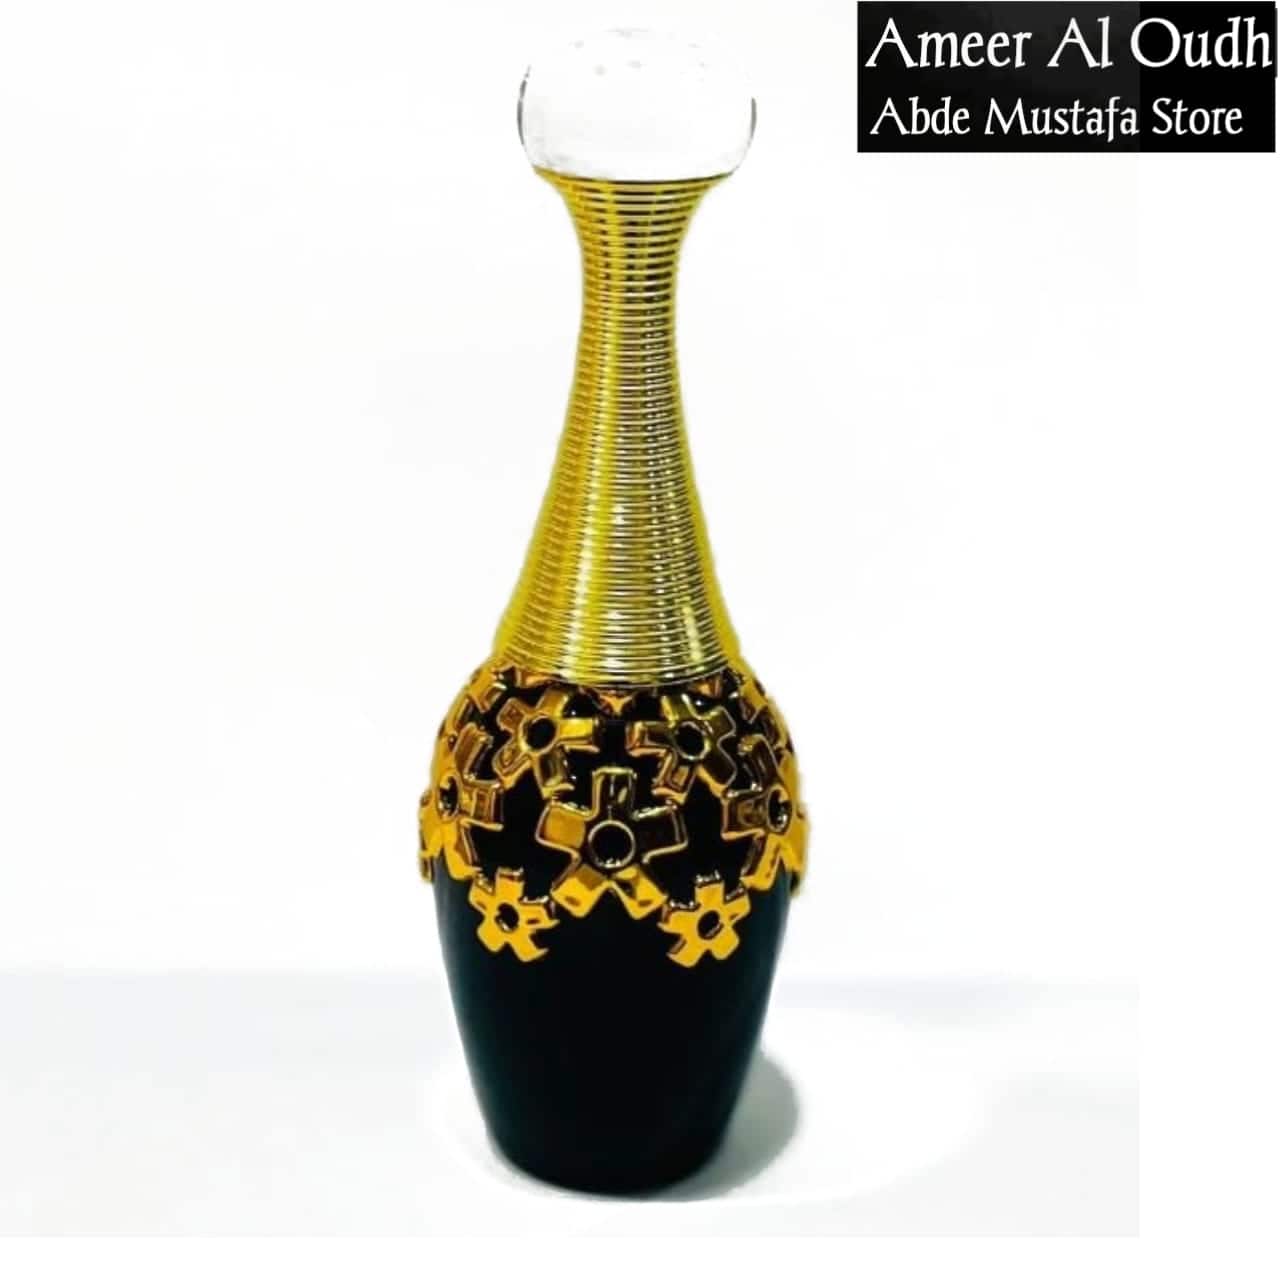 Ameer Al Oud Attar Premium Best Quality With Samples Testers Free By Abde Mustafa Store